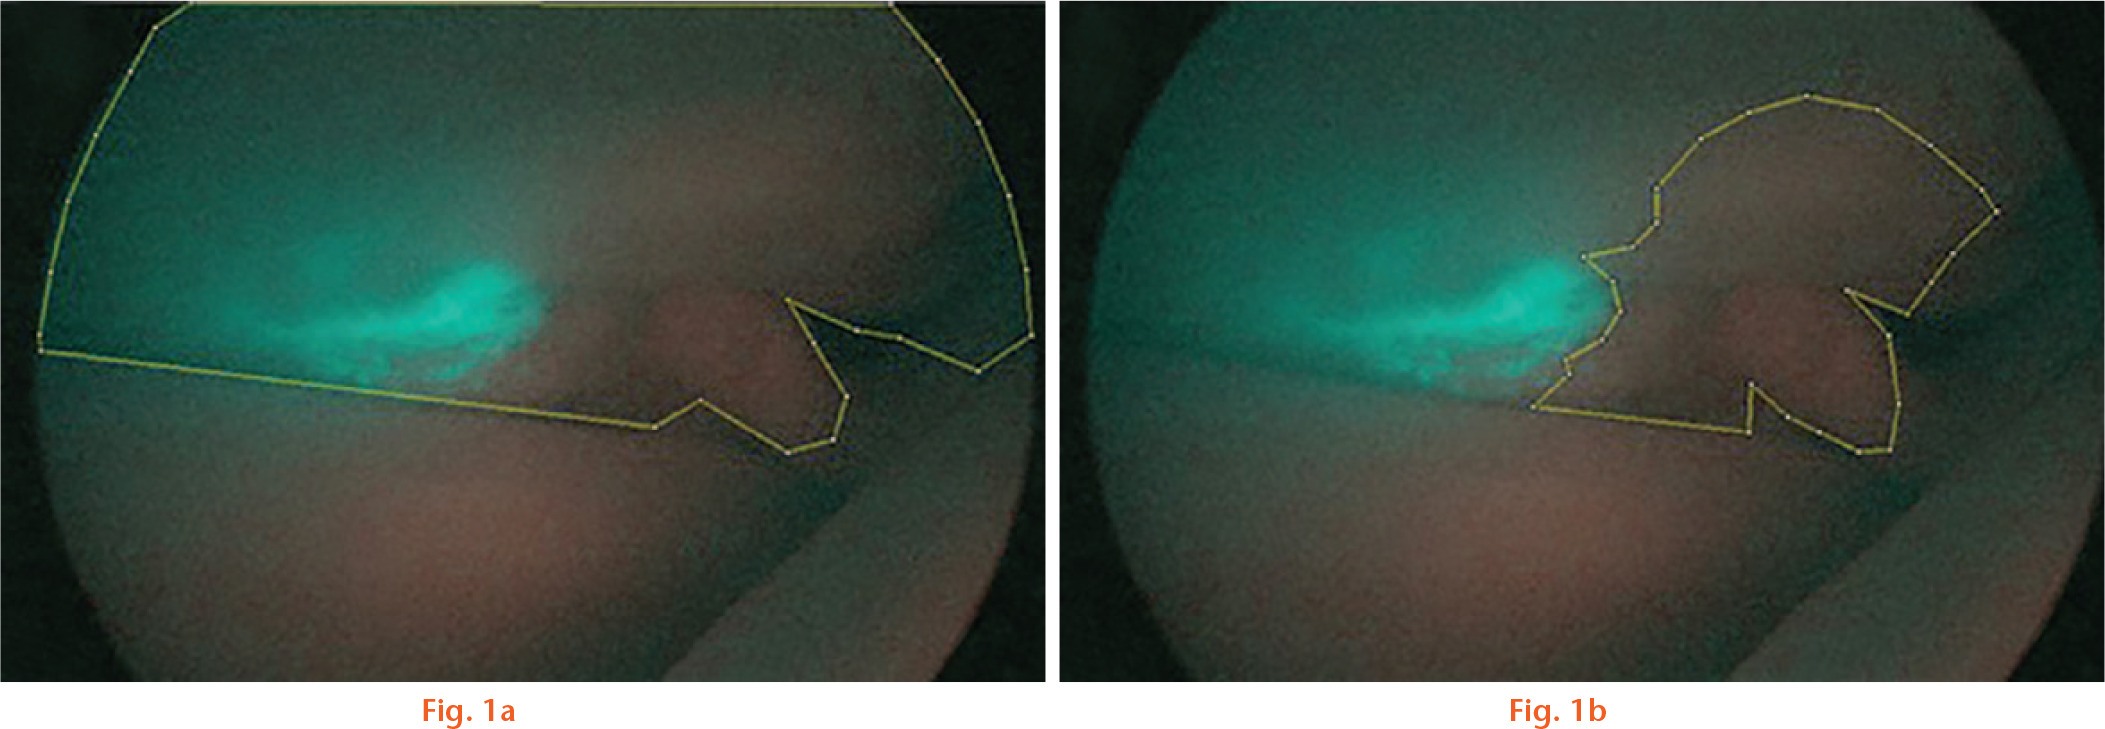 Fig. 1 
            Anterolateral area of a rotator cuff tear observed at the time of indocyanine green (ICG) fluorescence angiography. a) The area surrounded by yellow lines is the area of the rotator cuff; this area was measured using ImageJ/Fiji 1.46 software. b) The area surrounded by yellow lines is the hypovascular area in the rotator cuff; this area was measured using ImageJ/Fiji 1.46 software. The ratio of the hypovascular area to the total area of the rotator cuff was calculated.
          